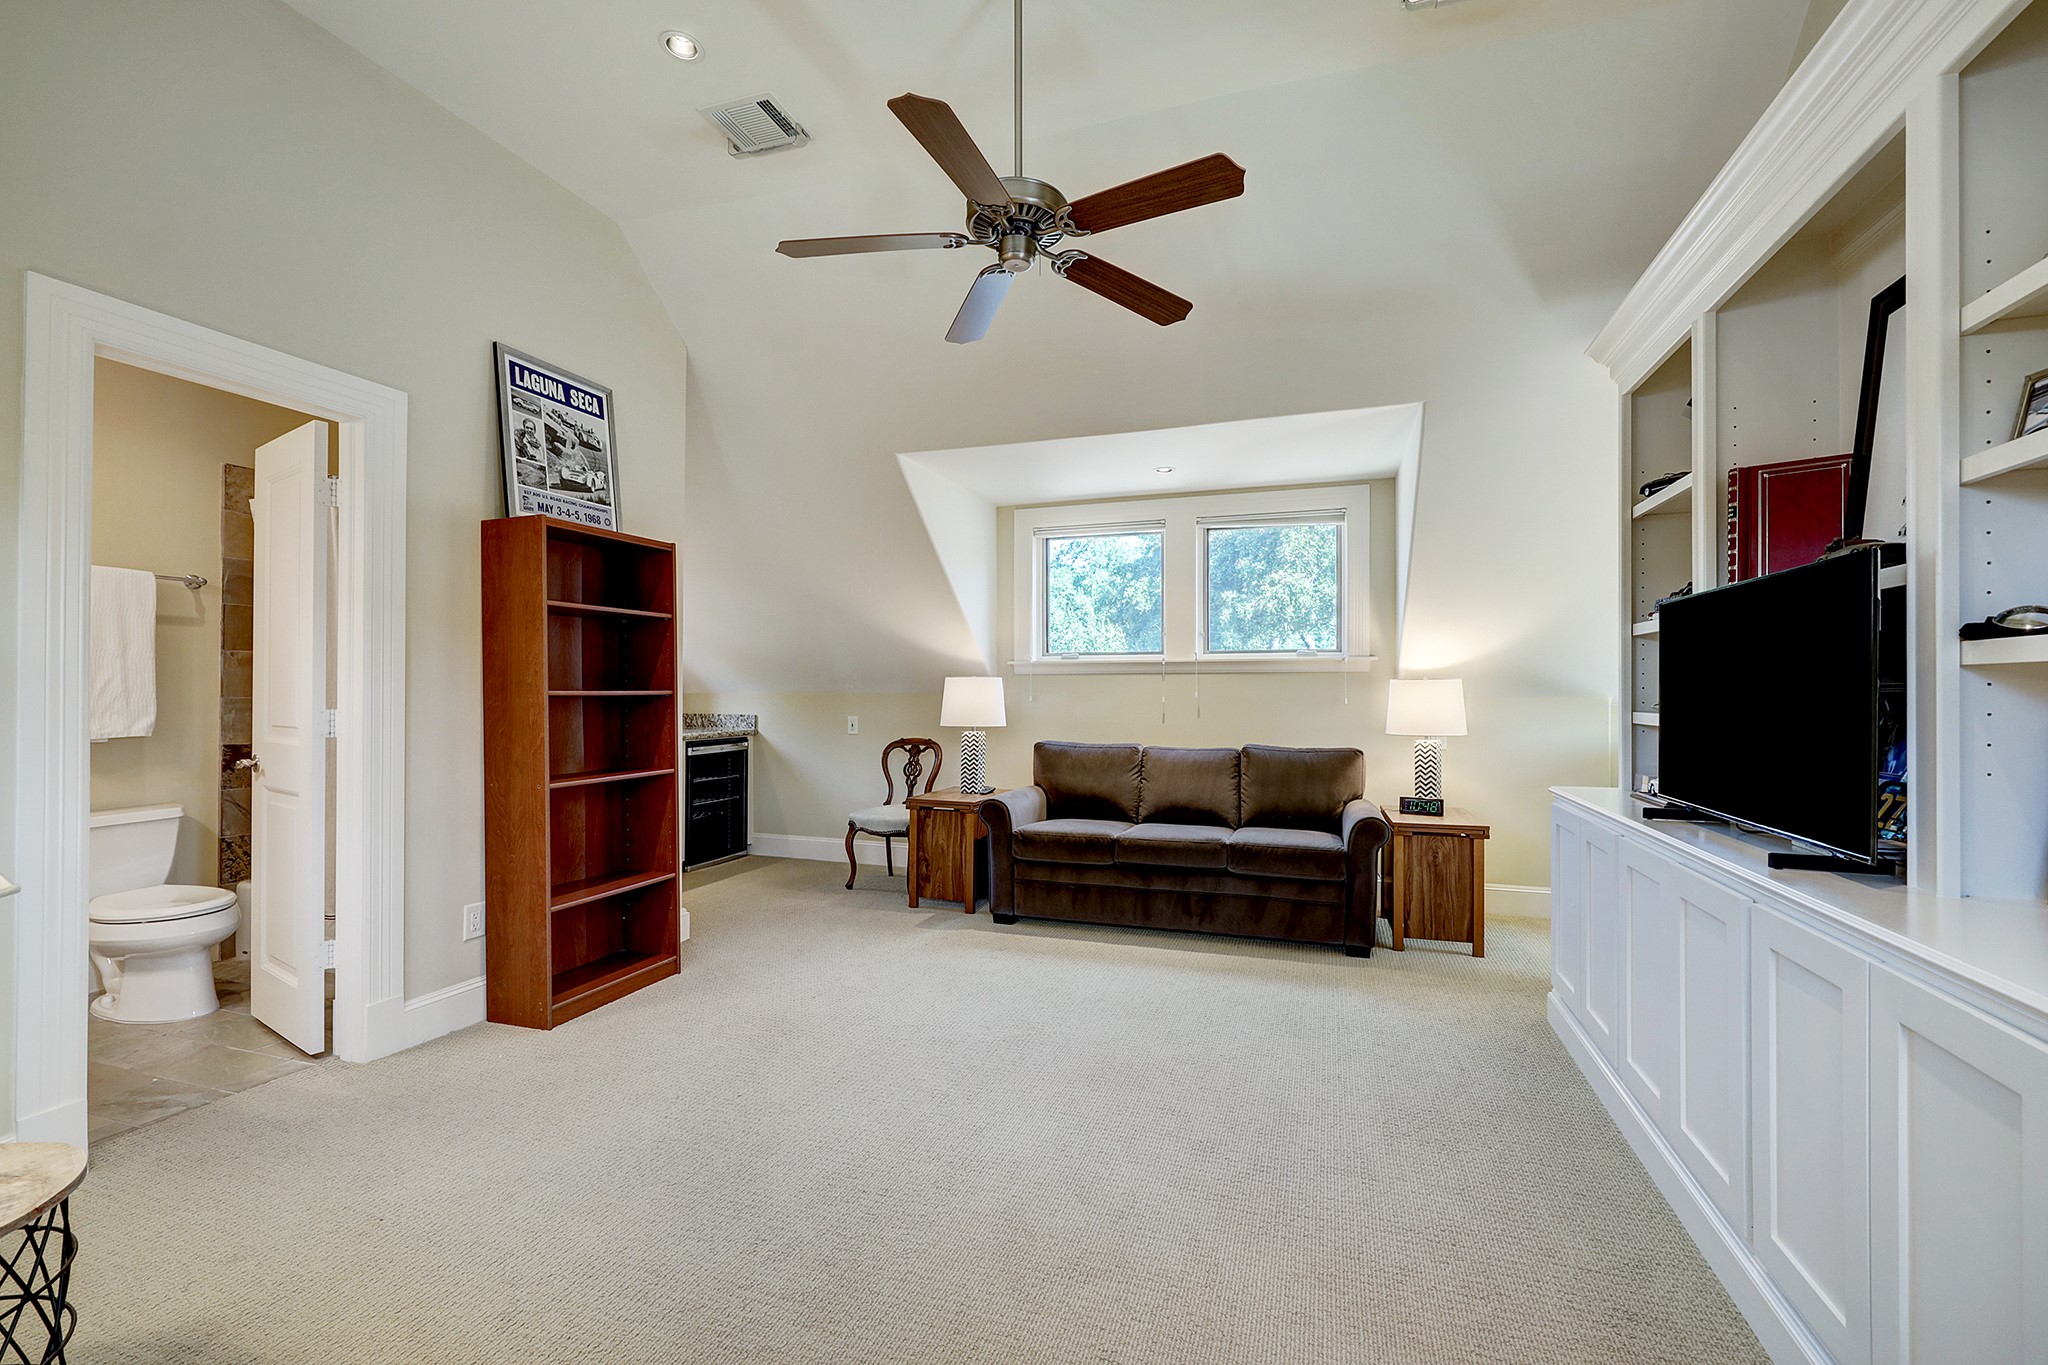 Game Room with 10' ceiling, full bath, and walk-in closet could easily be a fourth bedroom!